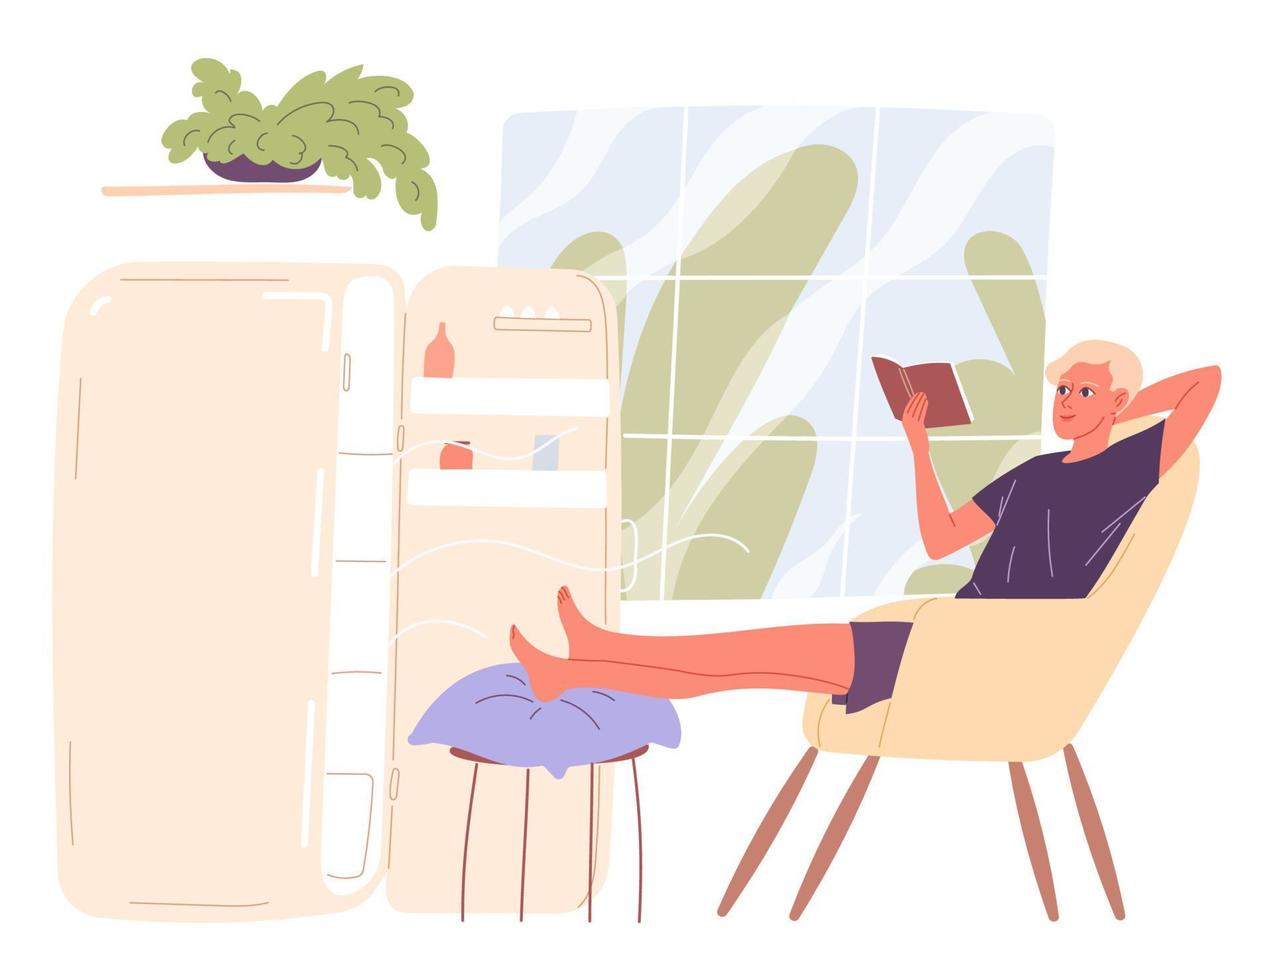 Man sits by an open refrigerator and chills out in the heat. vector